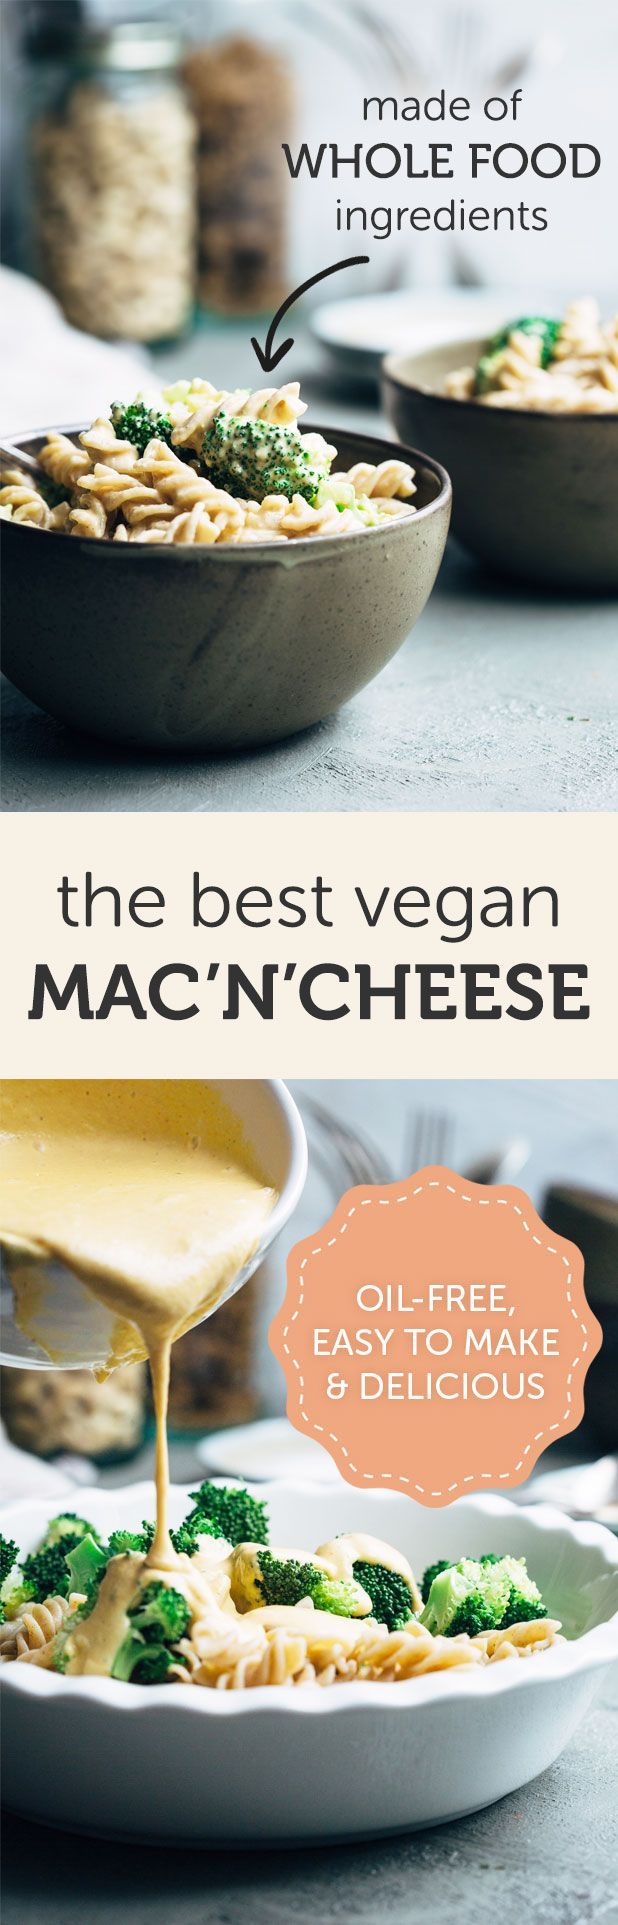 Check out our delicious & easy oil free, low fat, whole food plant-based vegan recipe for mac’n’cheese. No fancy ingredients